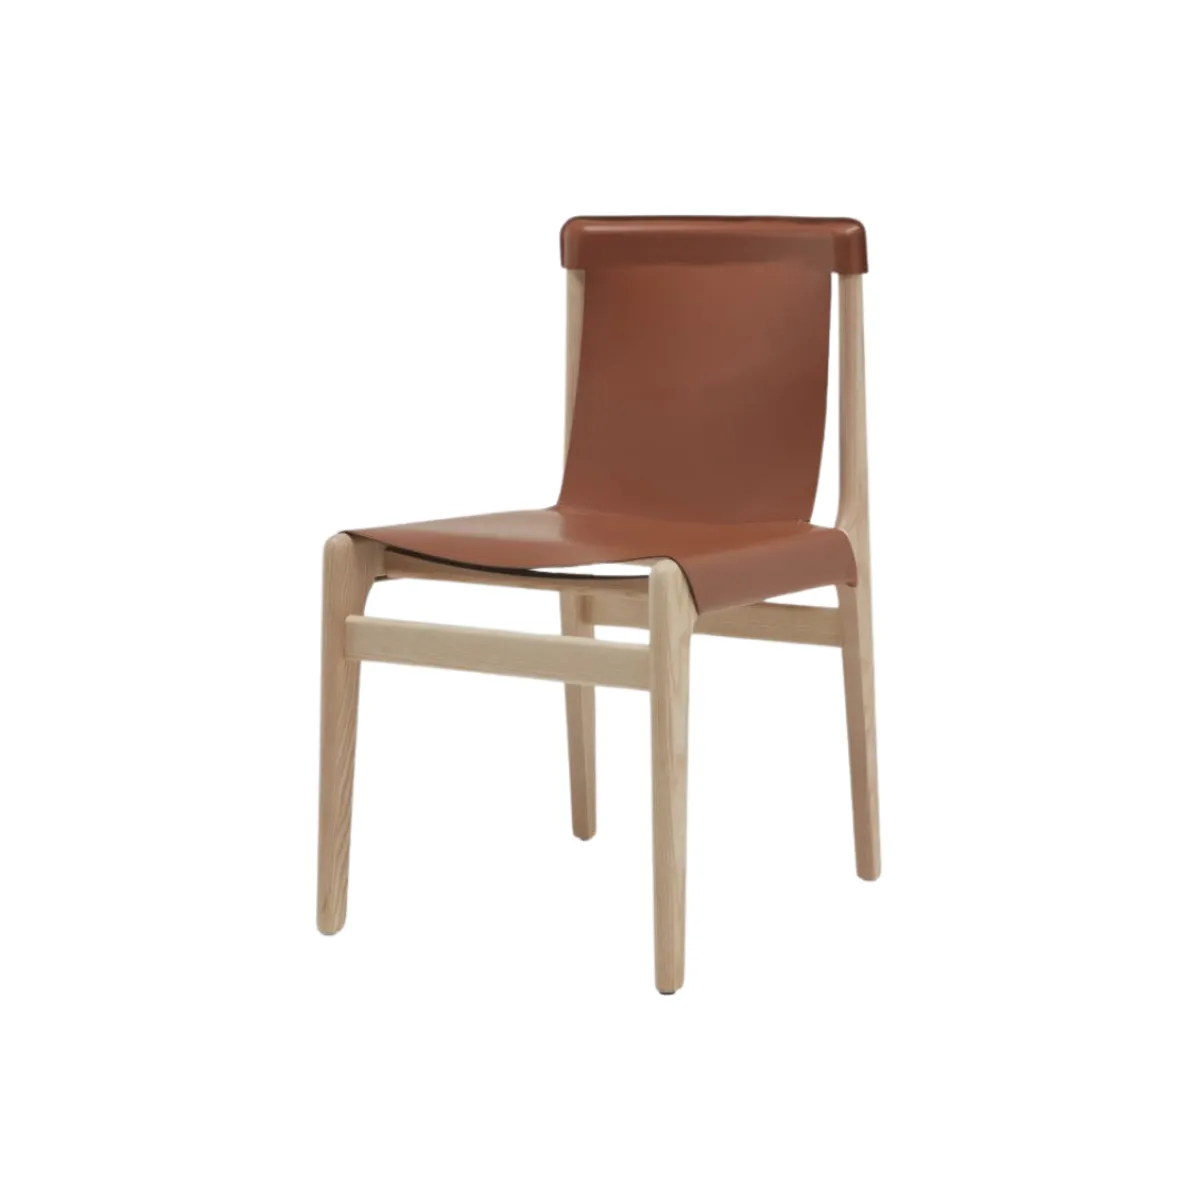 Morell side chair 1